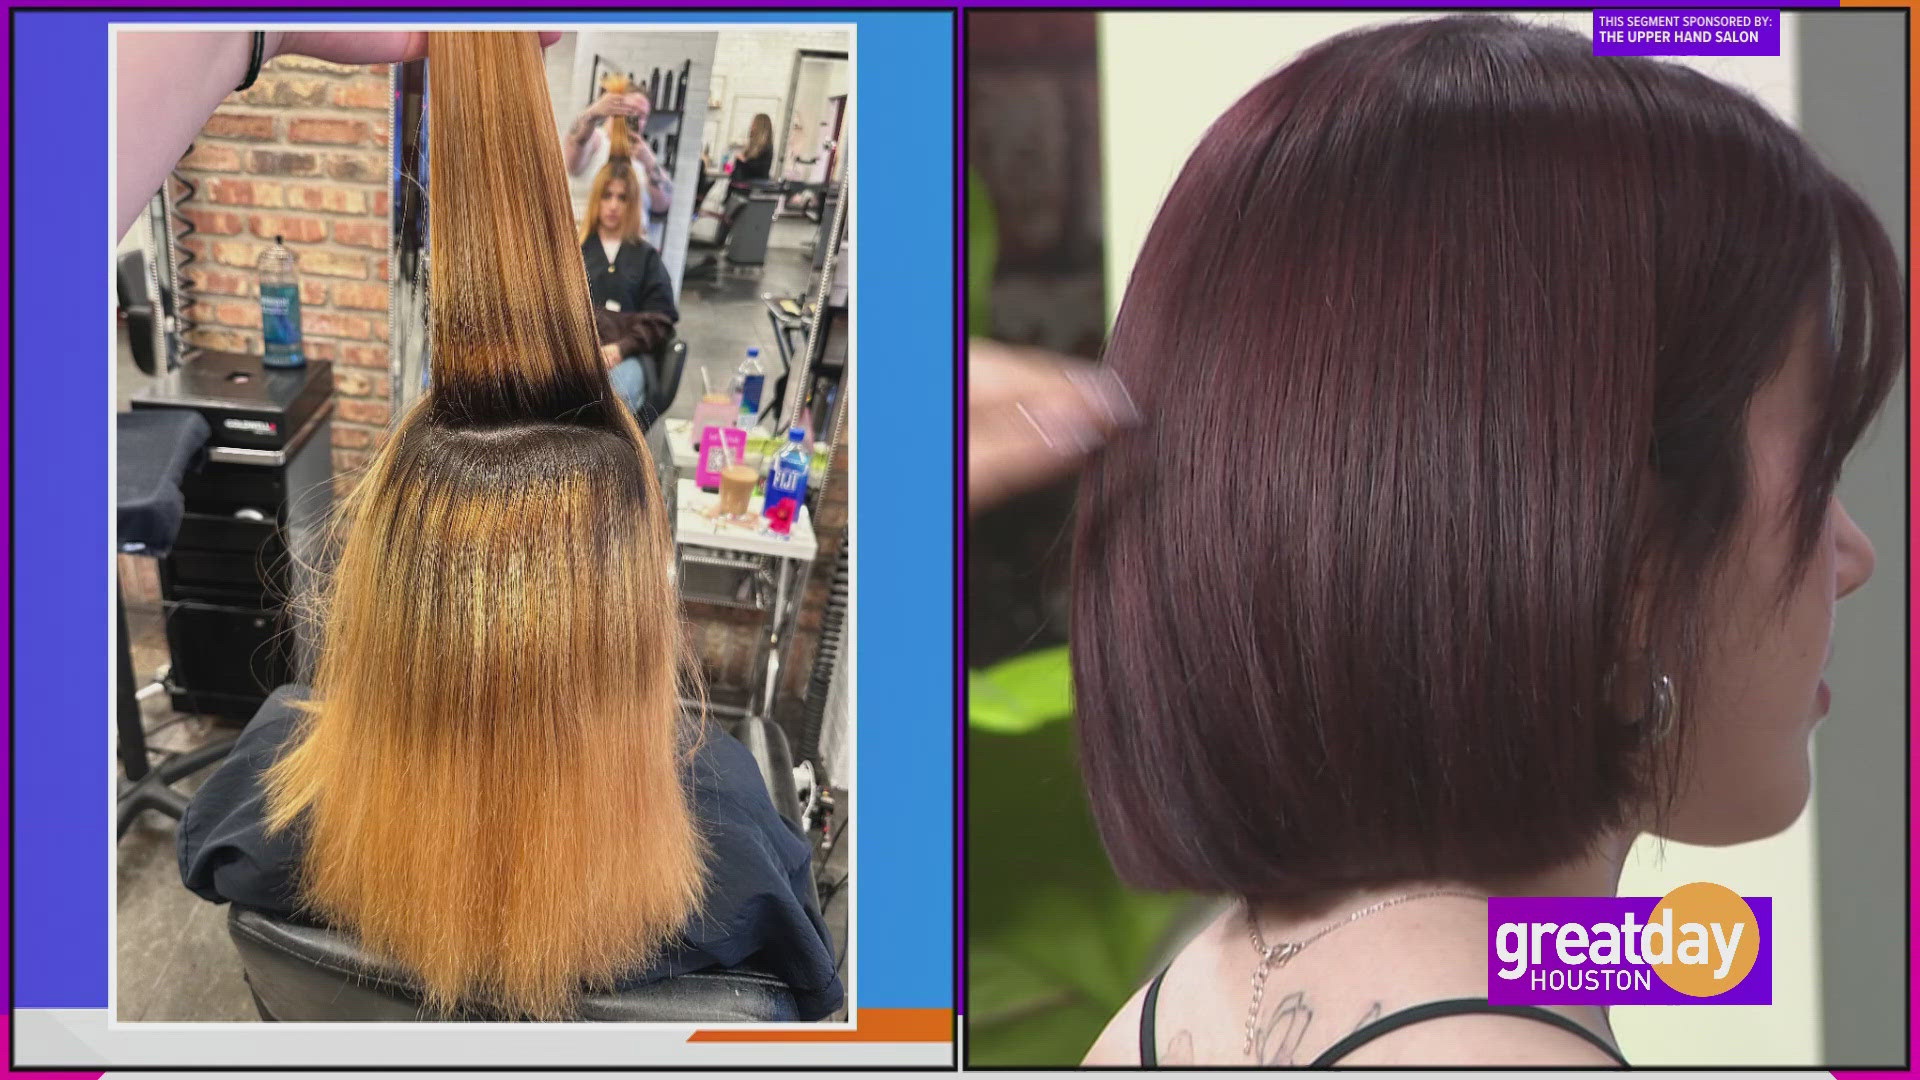 From extension installs to color correction, stylists at The Upper Hand can help transform your hair disaster.